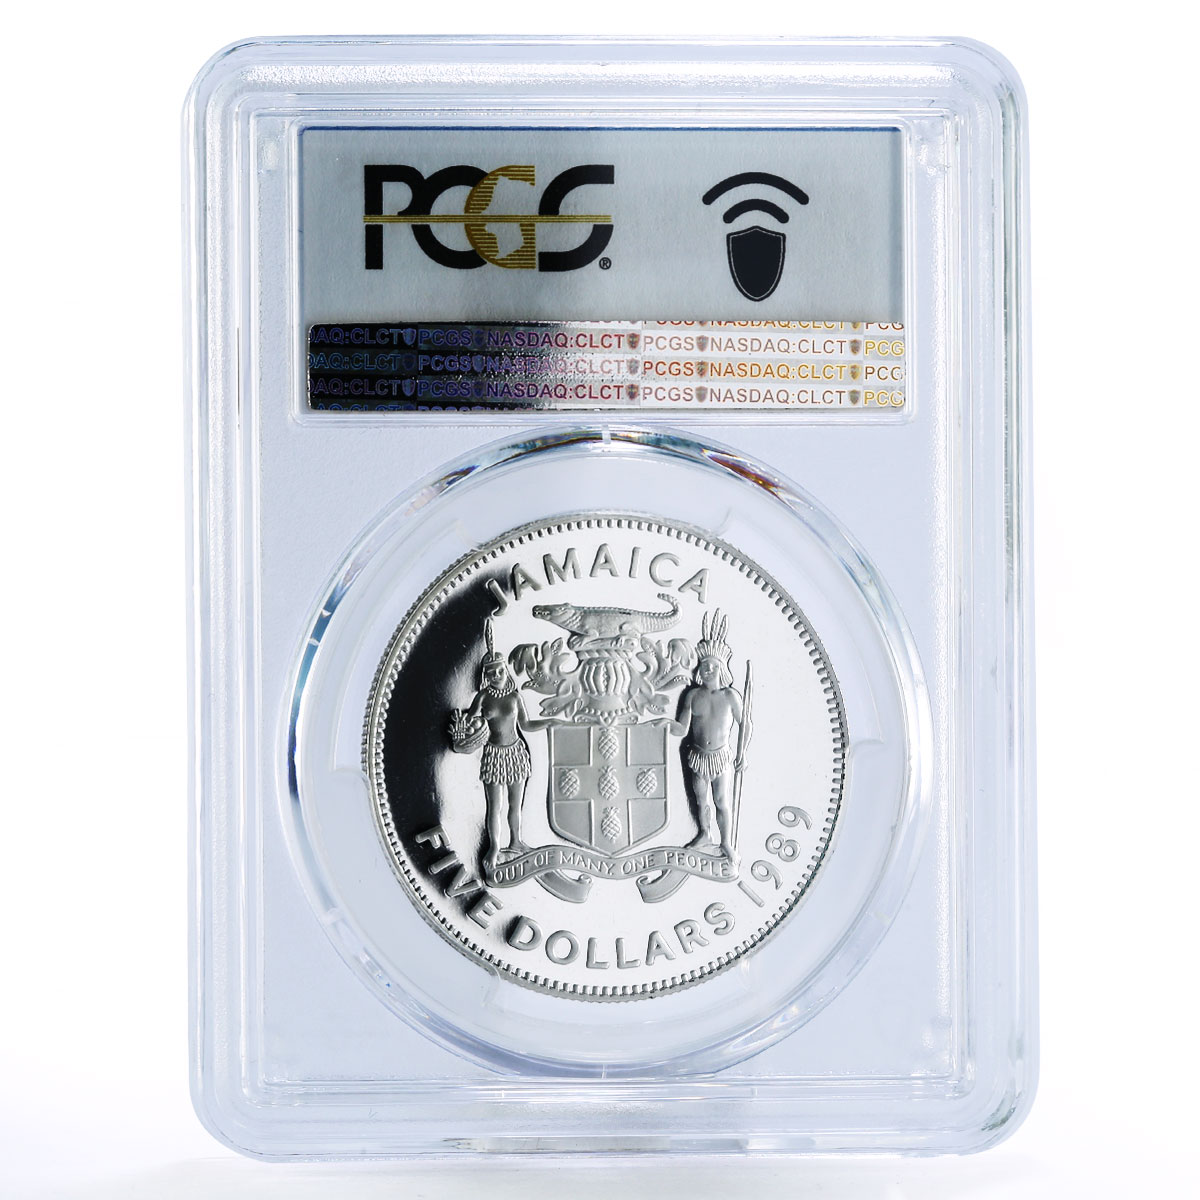 Jamaica 5 dollars N.W. Manley - Independence PR70 PCGS proof silver coin 1989